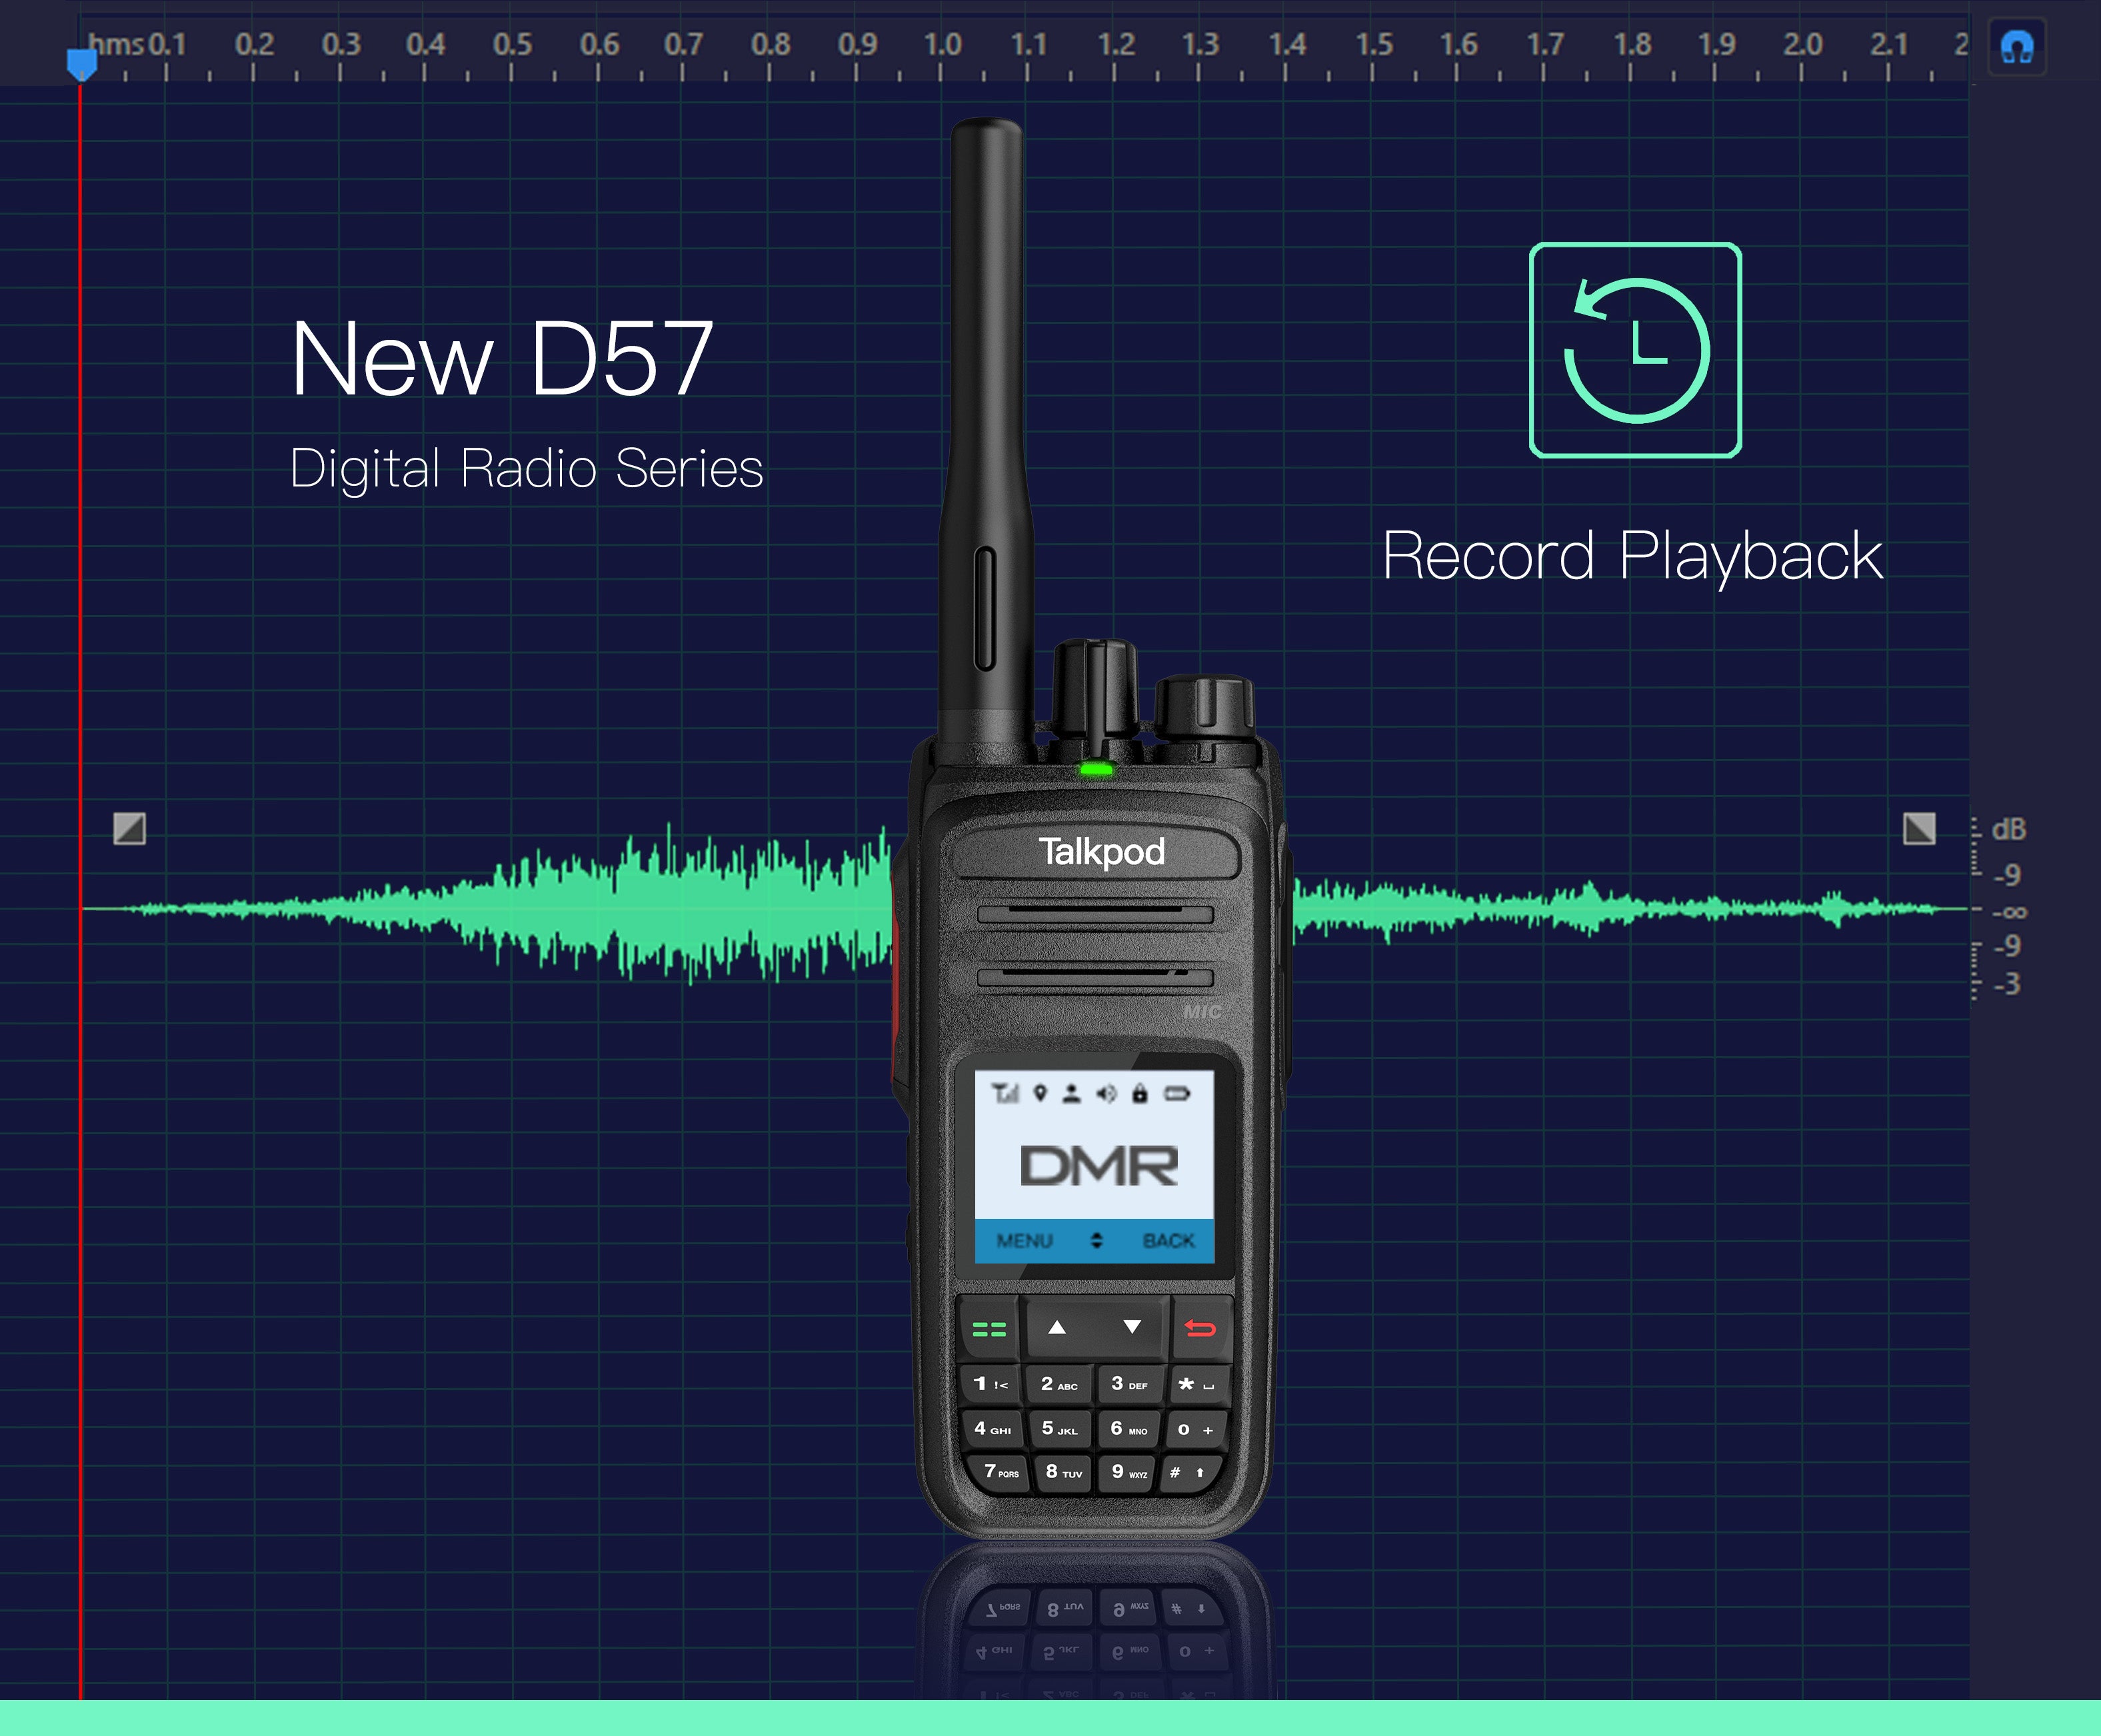 New DMR Series with Voice Record Playback